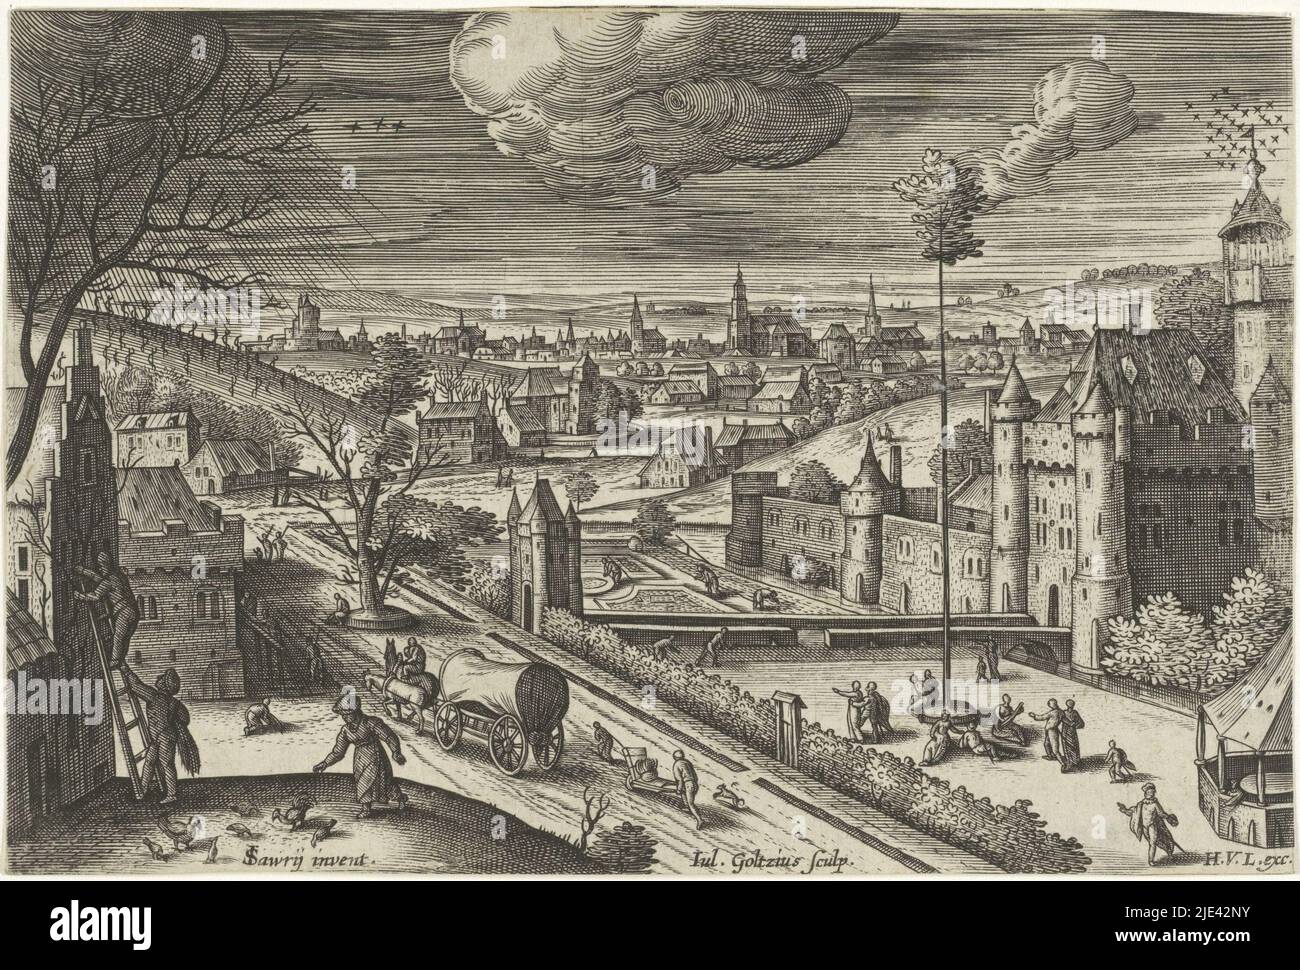 Landscape with a castle, Julius Goltzius, after Jacob Savery (I), c. 1560 - 1595, A landscape with a castle on the right, alongside a road. In the background a town. On the right, people are collecting brushwood., print maker: Julius Goltzius, (mentioned on object), Jacob Savery (I), (mentioned on object), publisher: Hans van Luyck, (mentioned on object), Antwerp, c. 1560 - 1595, paper, engraving, w 173 mm × h 115 mm Stock Photo